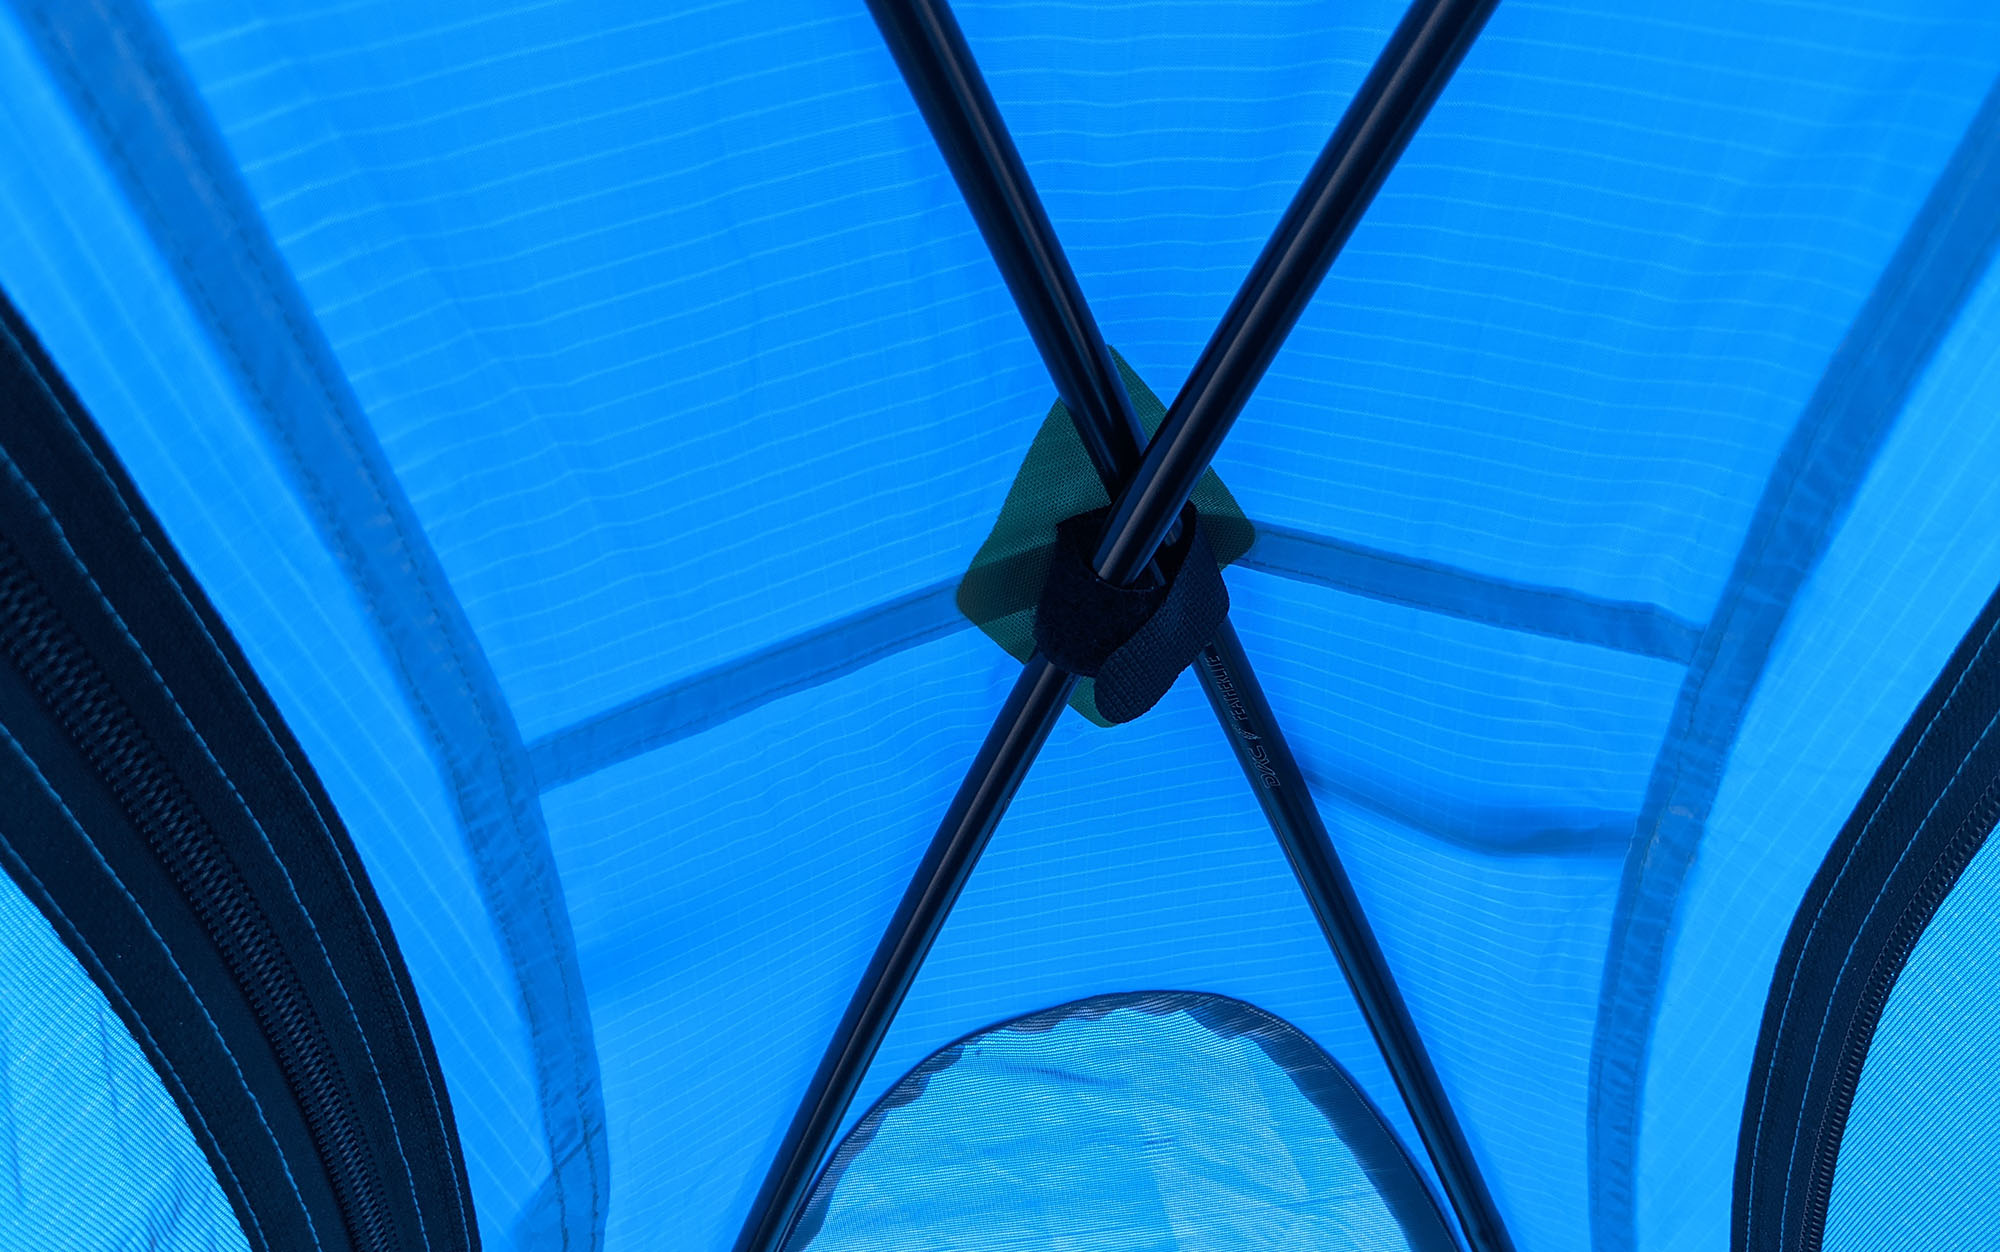 The crisscrossing poles of the Black Diamond Hilight are secured to the inside of tent using velcro straps.